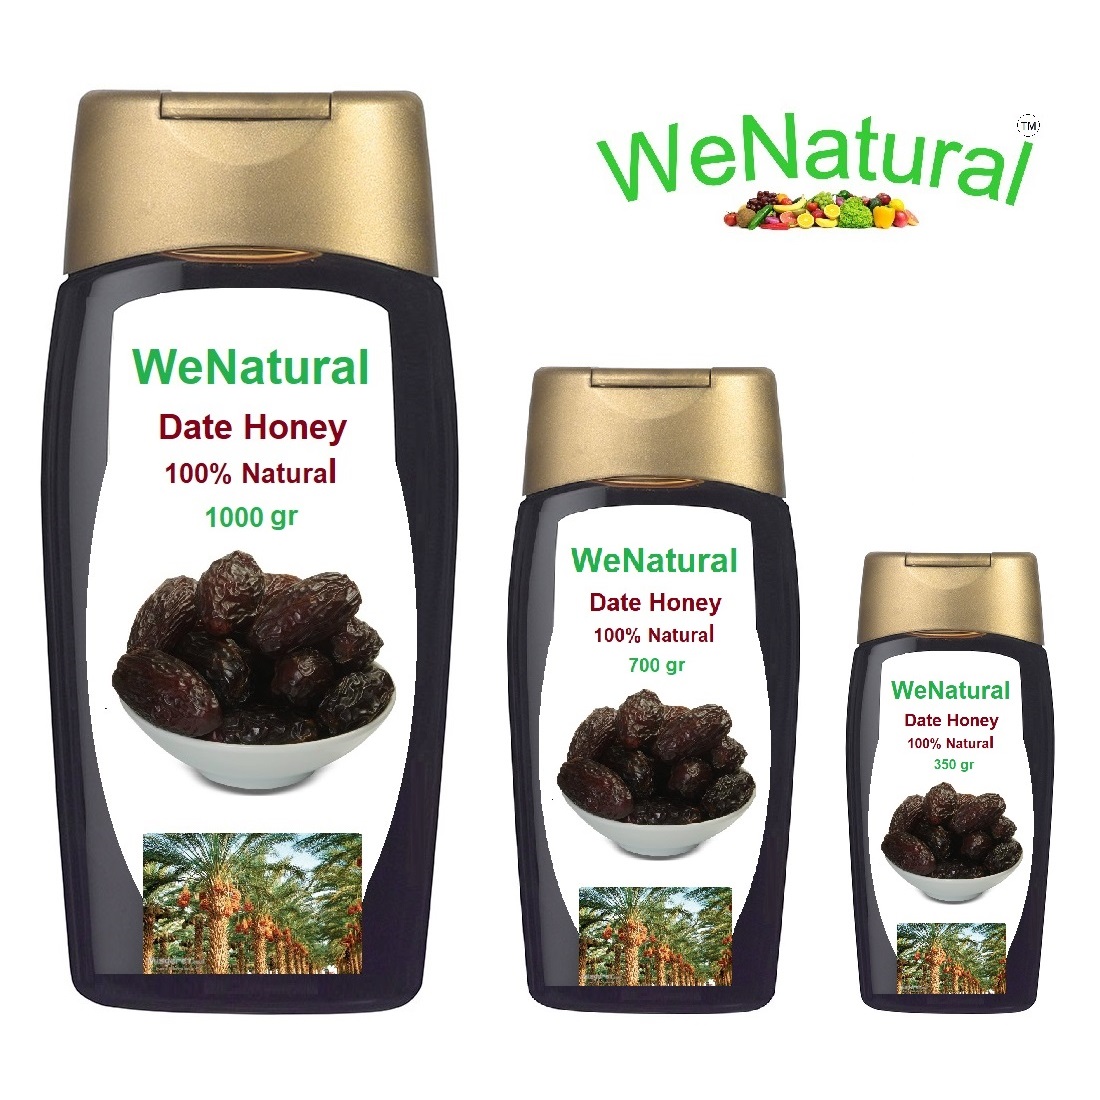 Planet Israel - Fresh Fruits | Fresh Citrus | Fresh Vegetables | Concentrated Pure Fruit Juice, NFC (Not from Concentrate), IQF (Individual Quick Frozen) WeNatural Date Hony, Silan